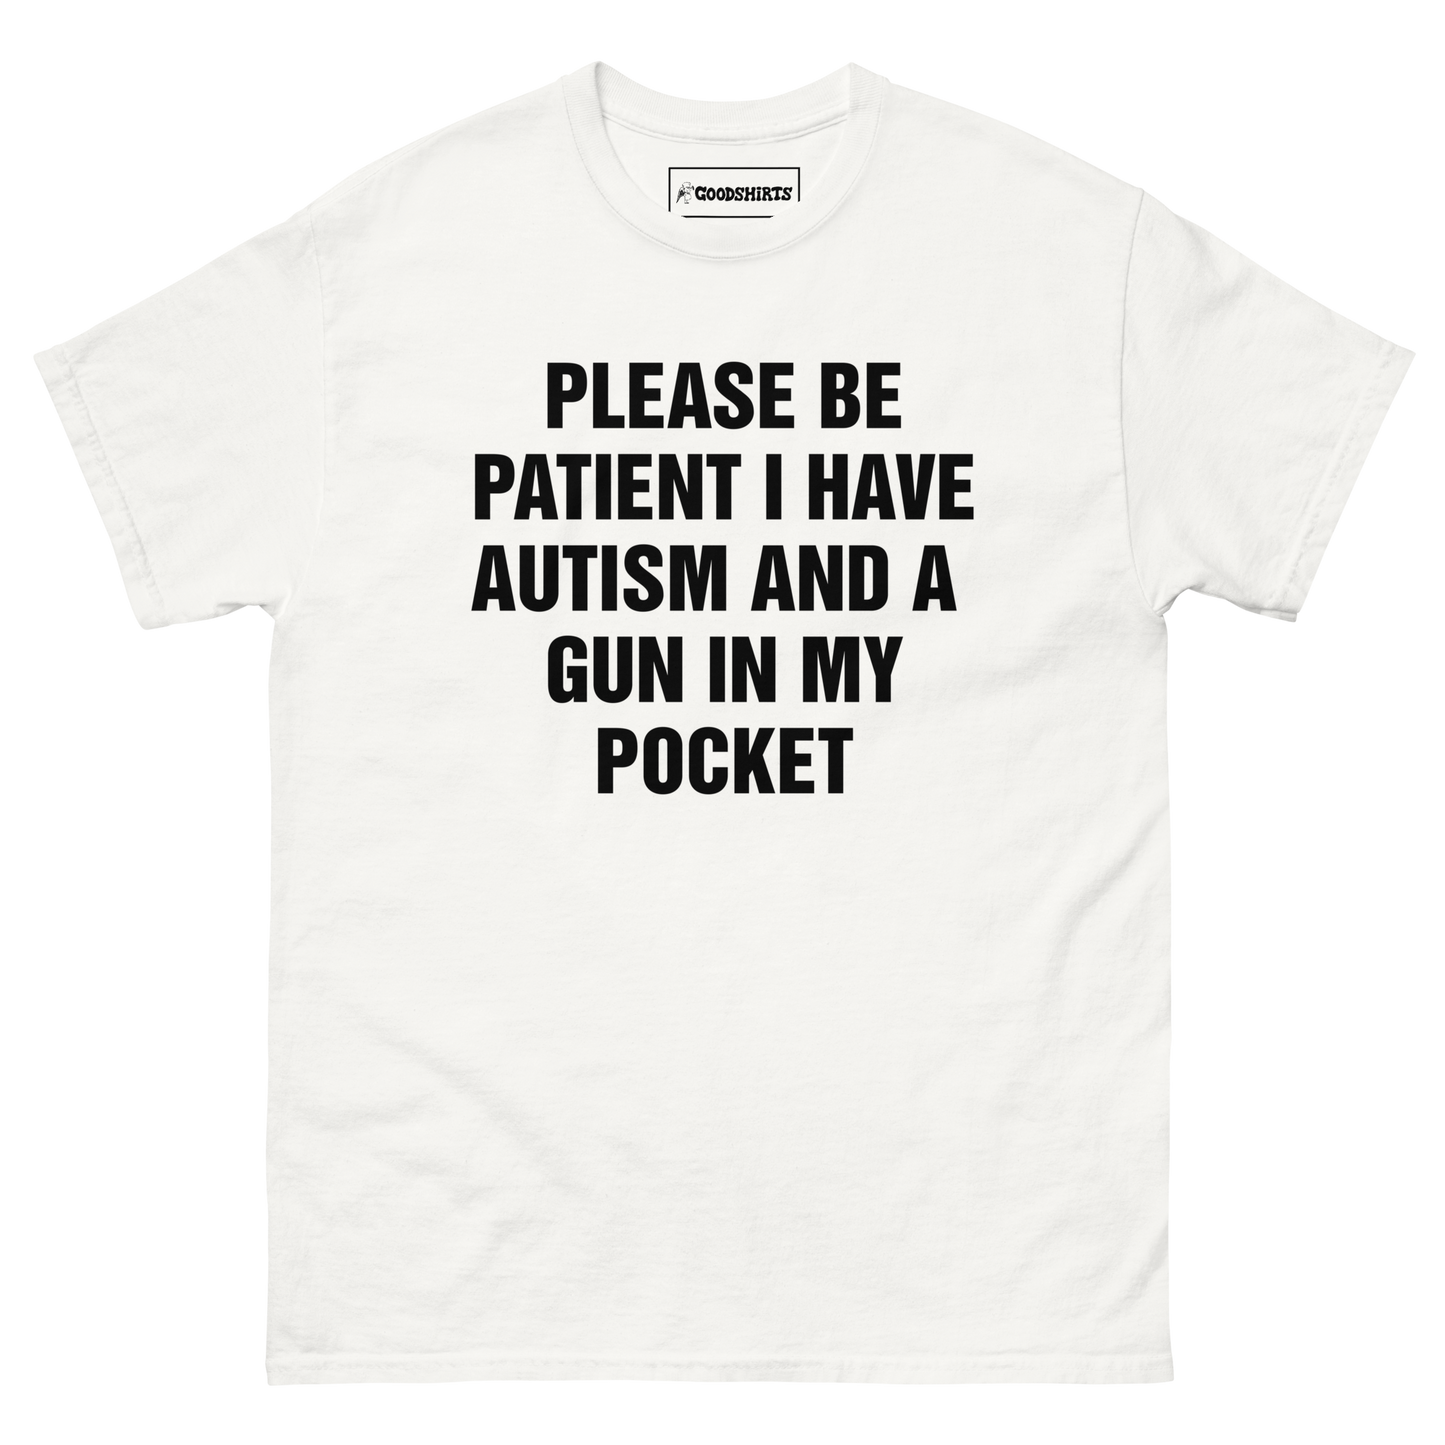 Please Be Patient I Have Autism And A Gun In My Pocket.